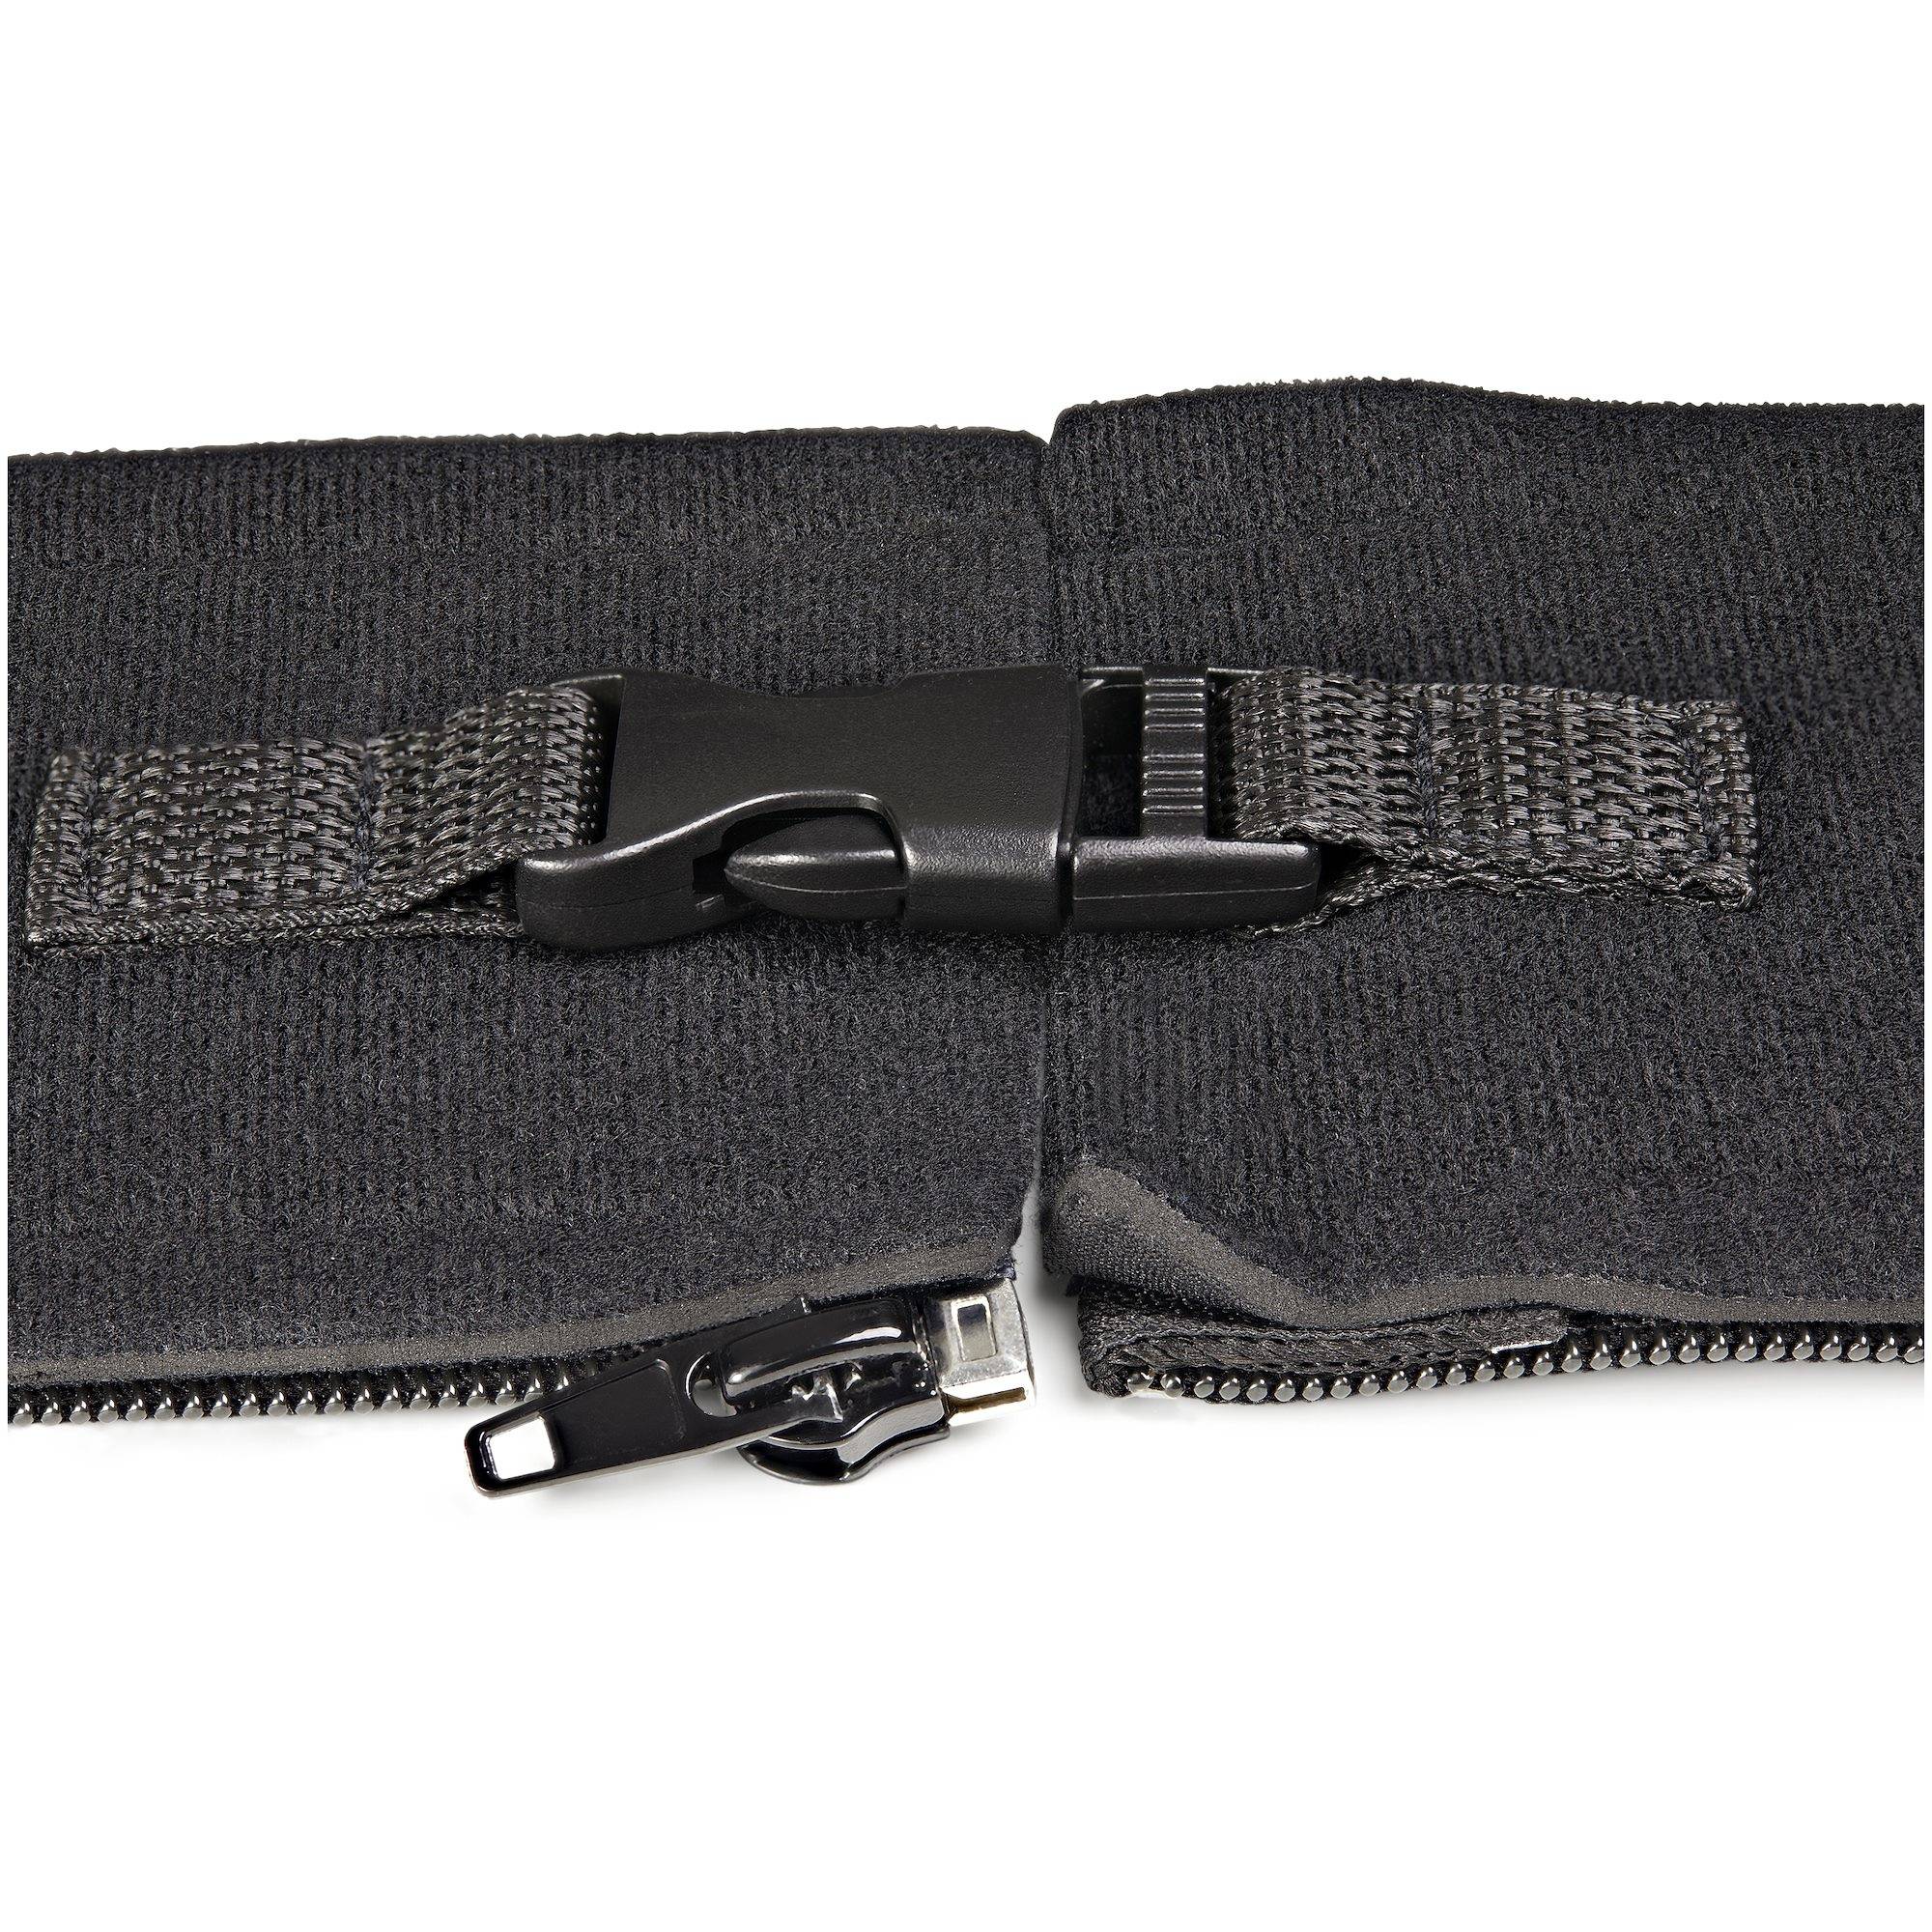 Rca Informatique - image du produit : 40IN NEOPRENE CABLE MANAGEMENT - SLEEVE WITH ZIPPER AND BUCKLE